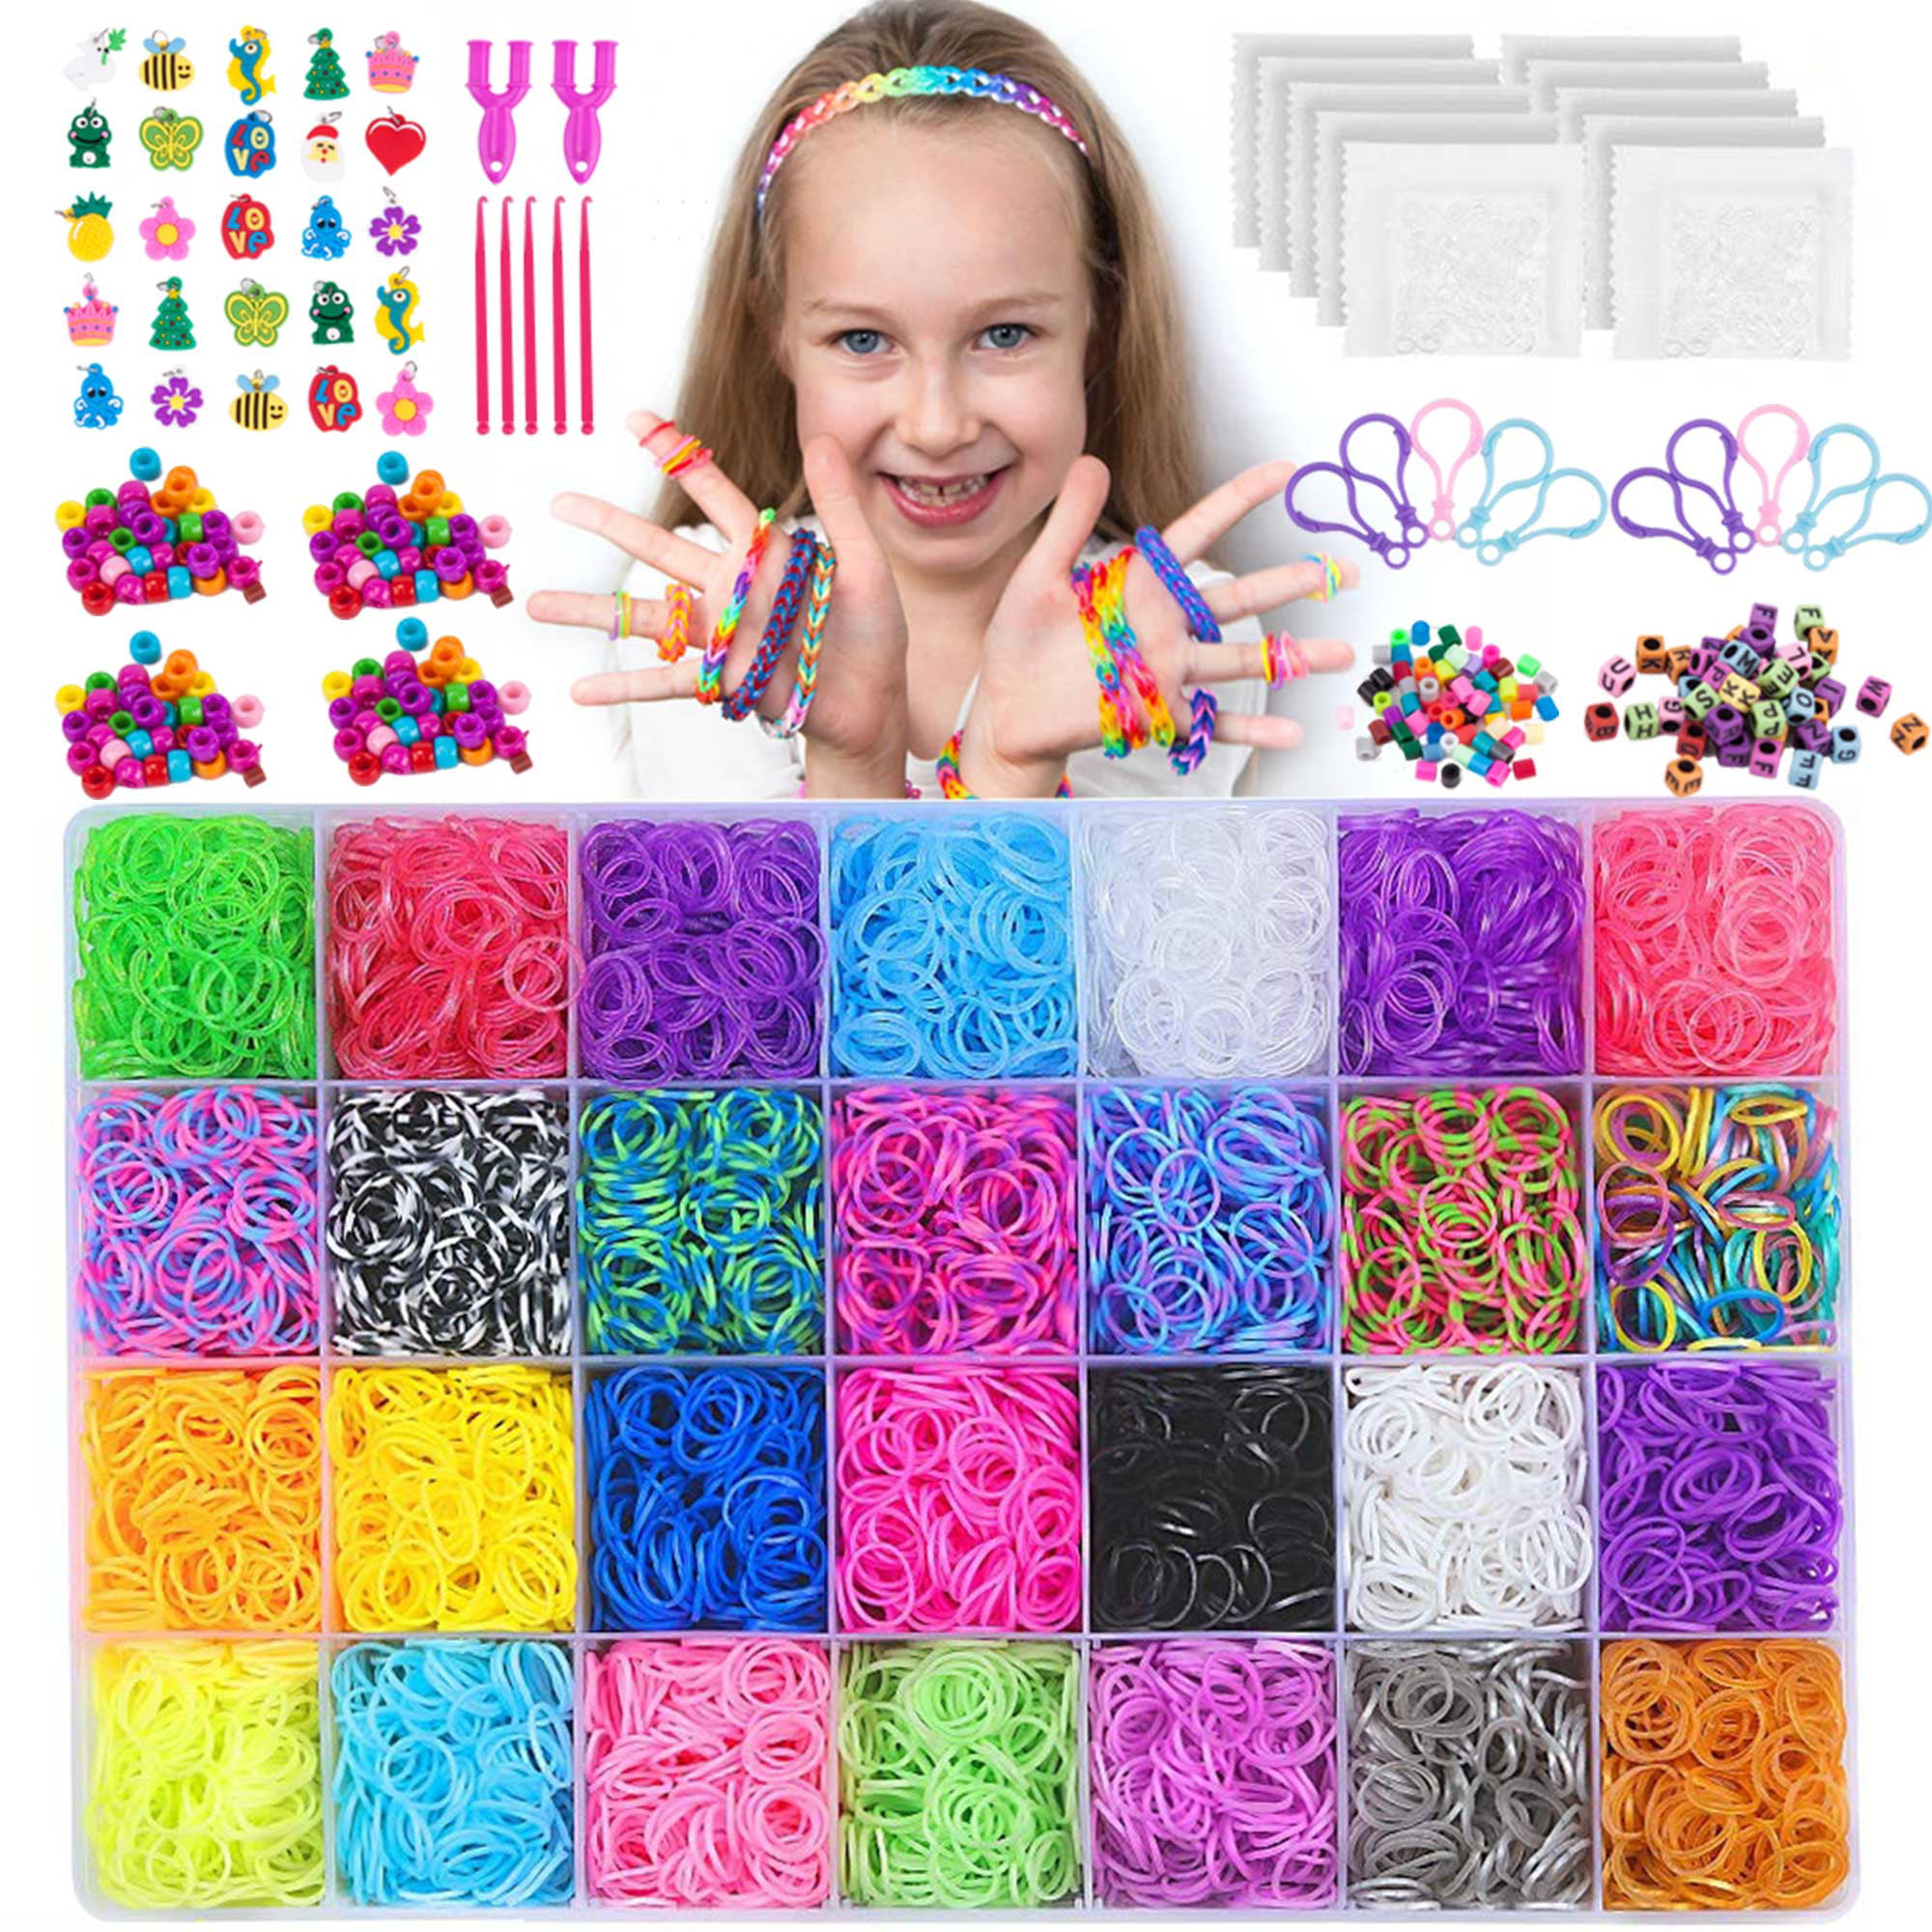 9x Colourful Loom Bands Charms Rubber Friendship Bracelet Making Set 